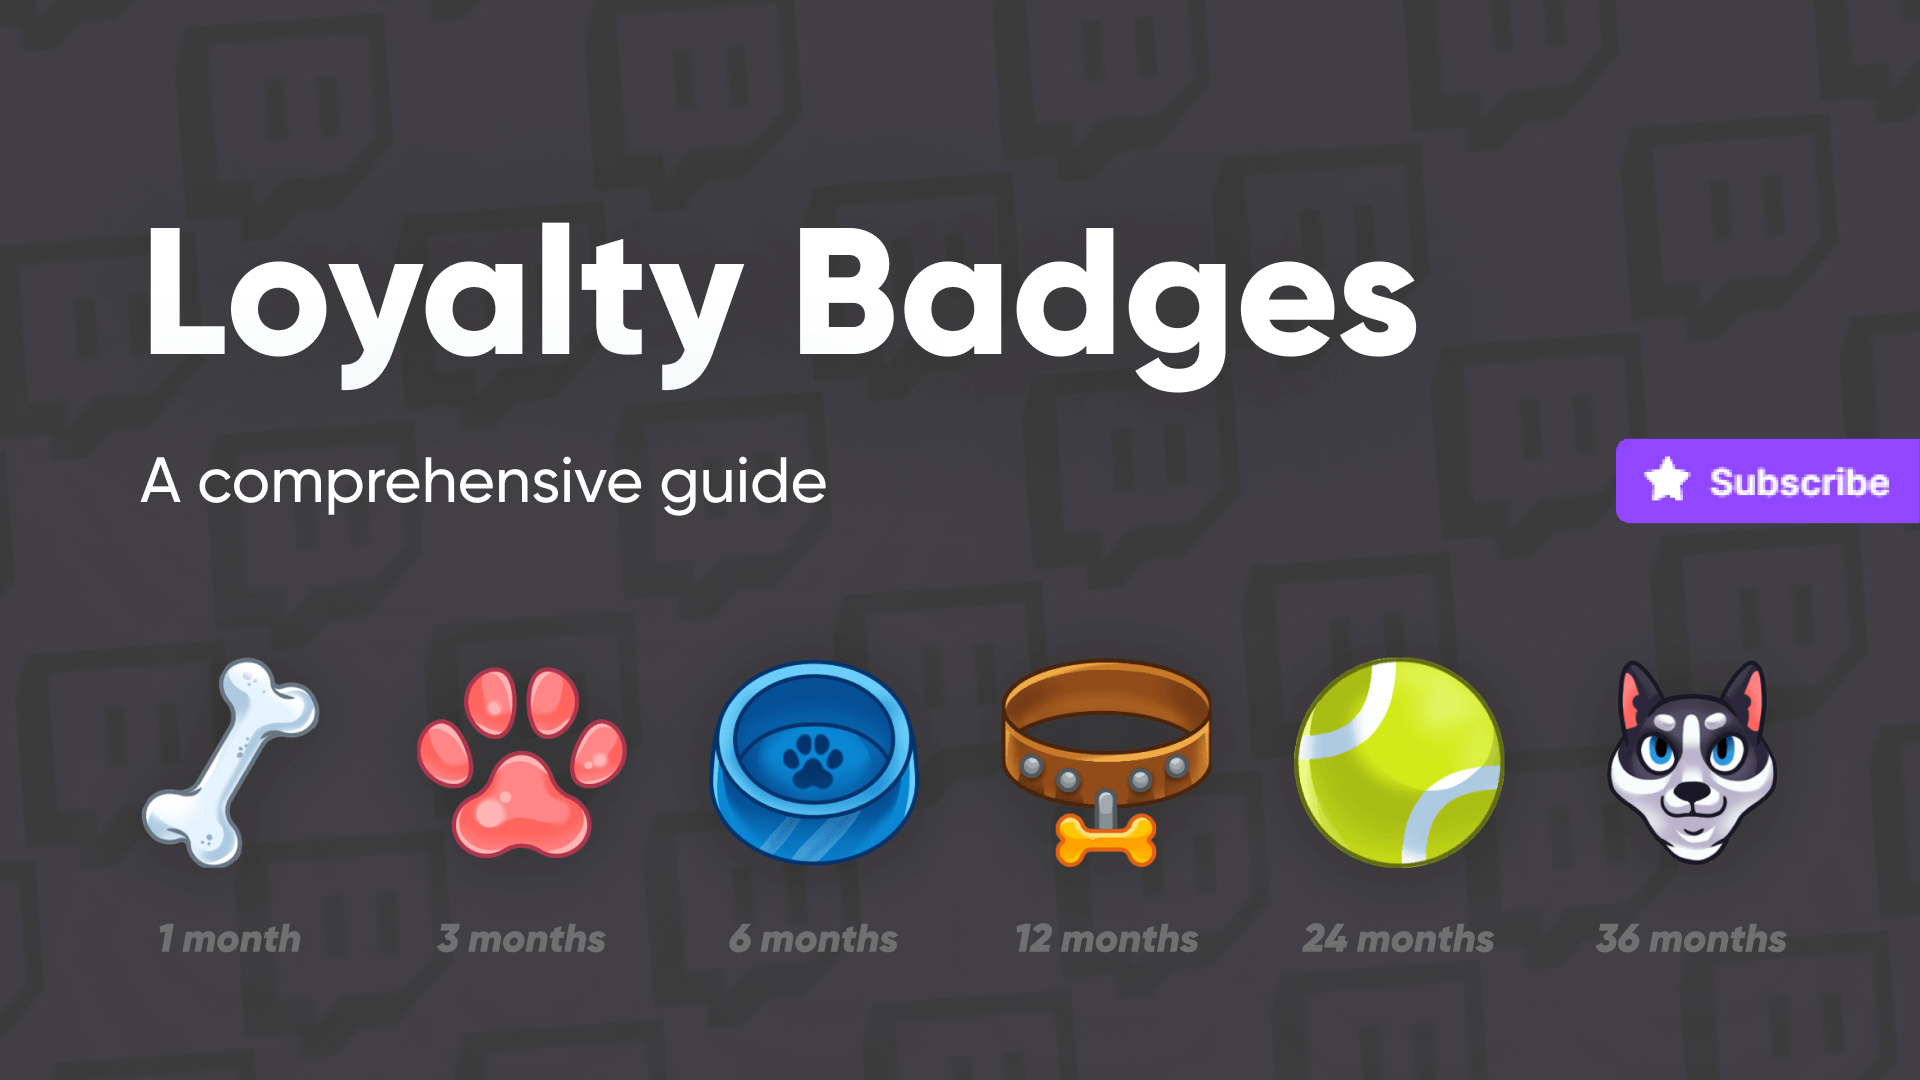 Twitch Badges Guide What Are They? How to Use Them? And More!